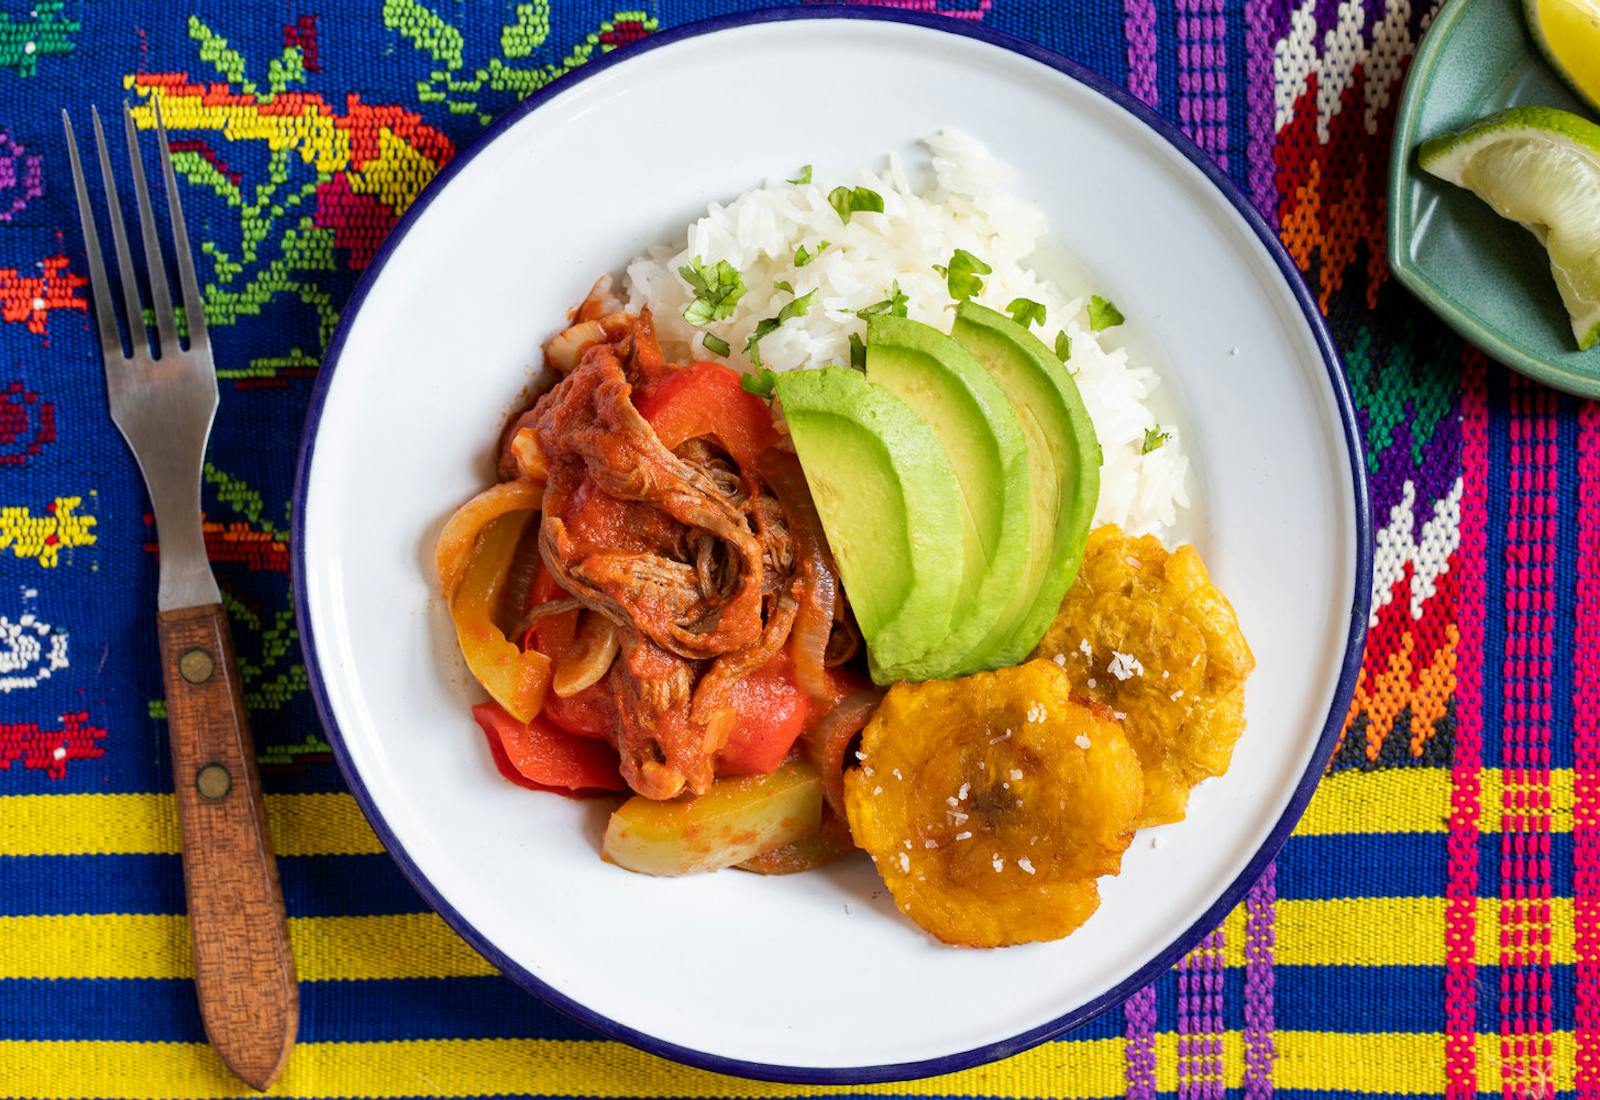 Ropa vieja with tostones, white rice and avocado on white plate alongside dish with lime wedges, atop vibrant woven tablecloth.